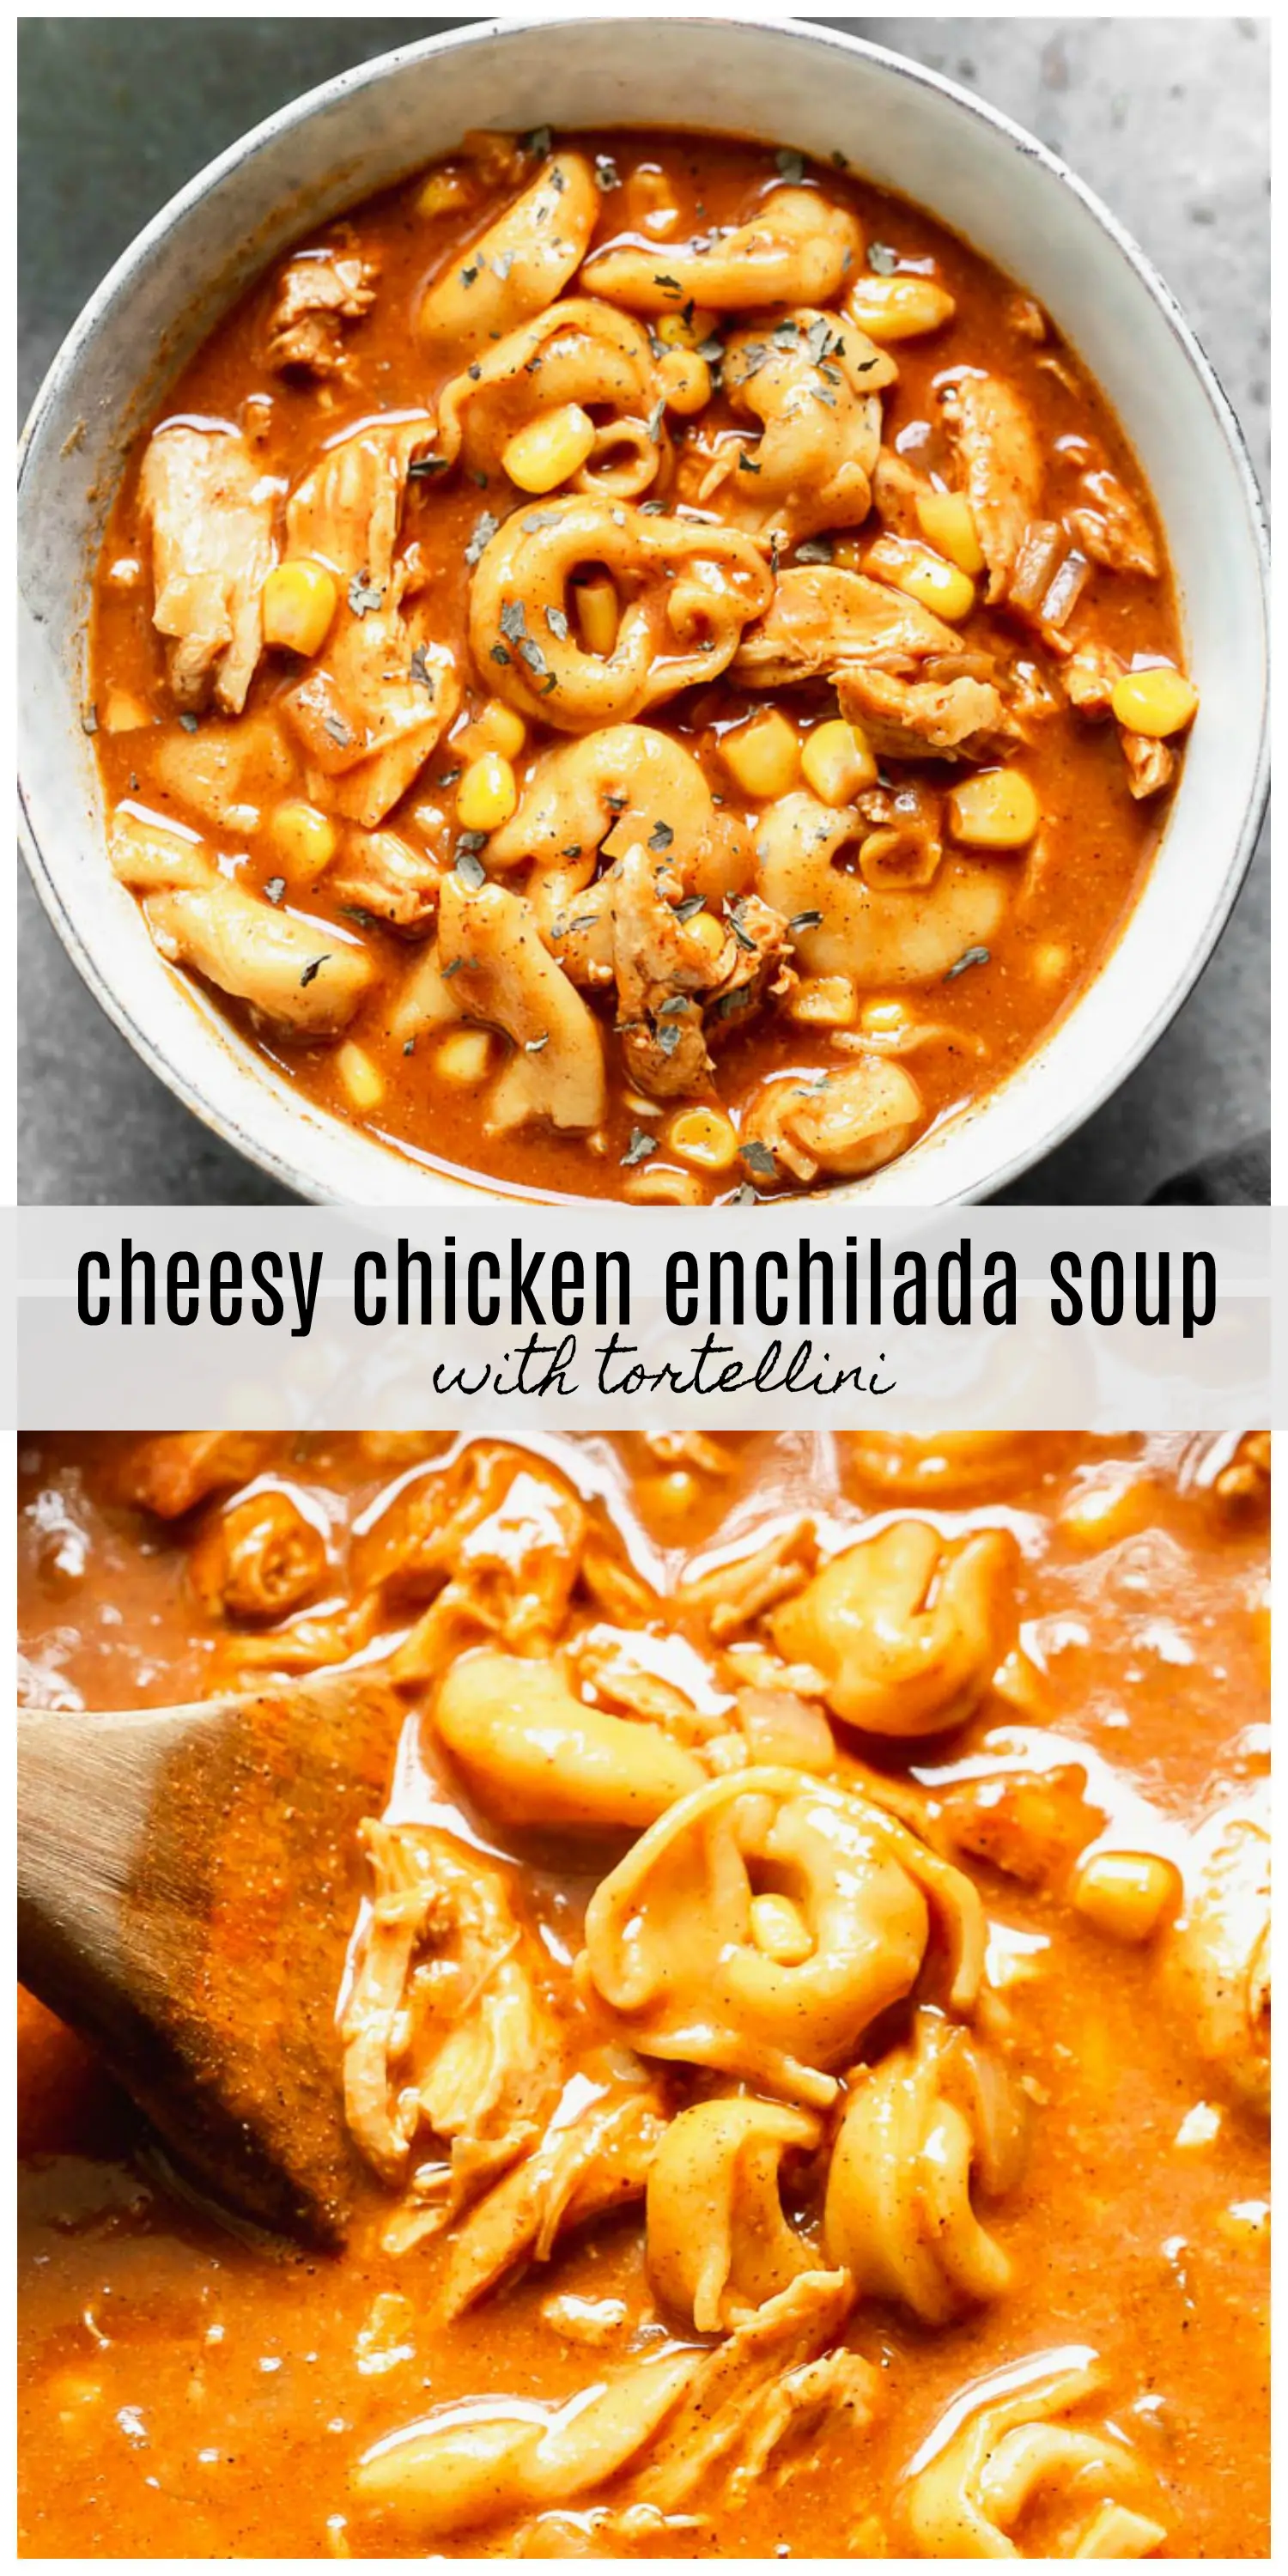 Cheesy Chicken Enchilada Soup with Tortellini is the easiest throw-it-all-in-a-pot, cozy fall soup. It's packed with tender chicken, sweet corn, tortellini, the most delicious enchilada-like flavor, plenty of sharp cheddar cheese. Comforting and so delicious. 